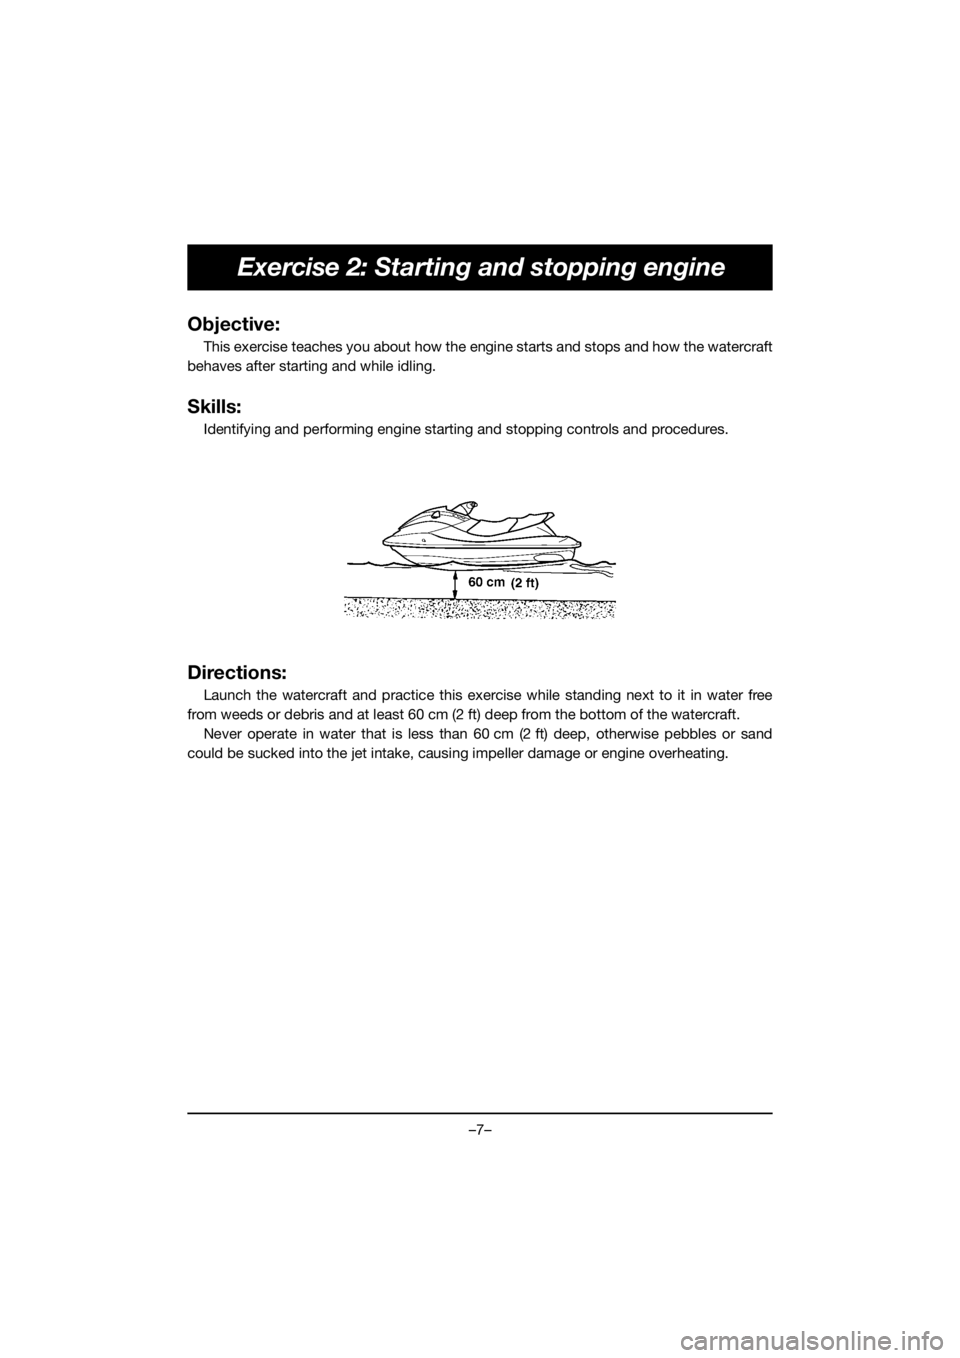 YAMAHA EX SPORT 2019  Manual de utilização (in Portuguese) –7–
Exercise 2: Starting and stopping engine
Objective:
This exercise teaches you about how the engine starts and stops and how the watercraft
behaves after starting and while idling.
Skills:
Iden